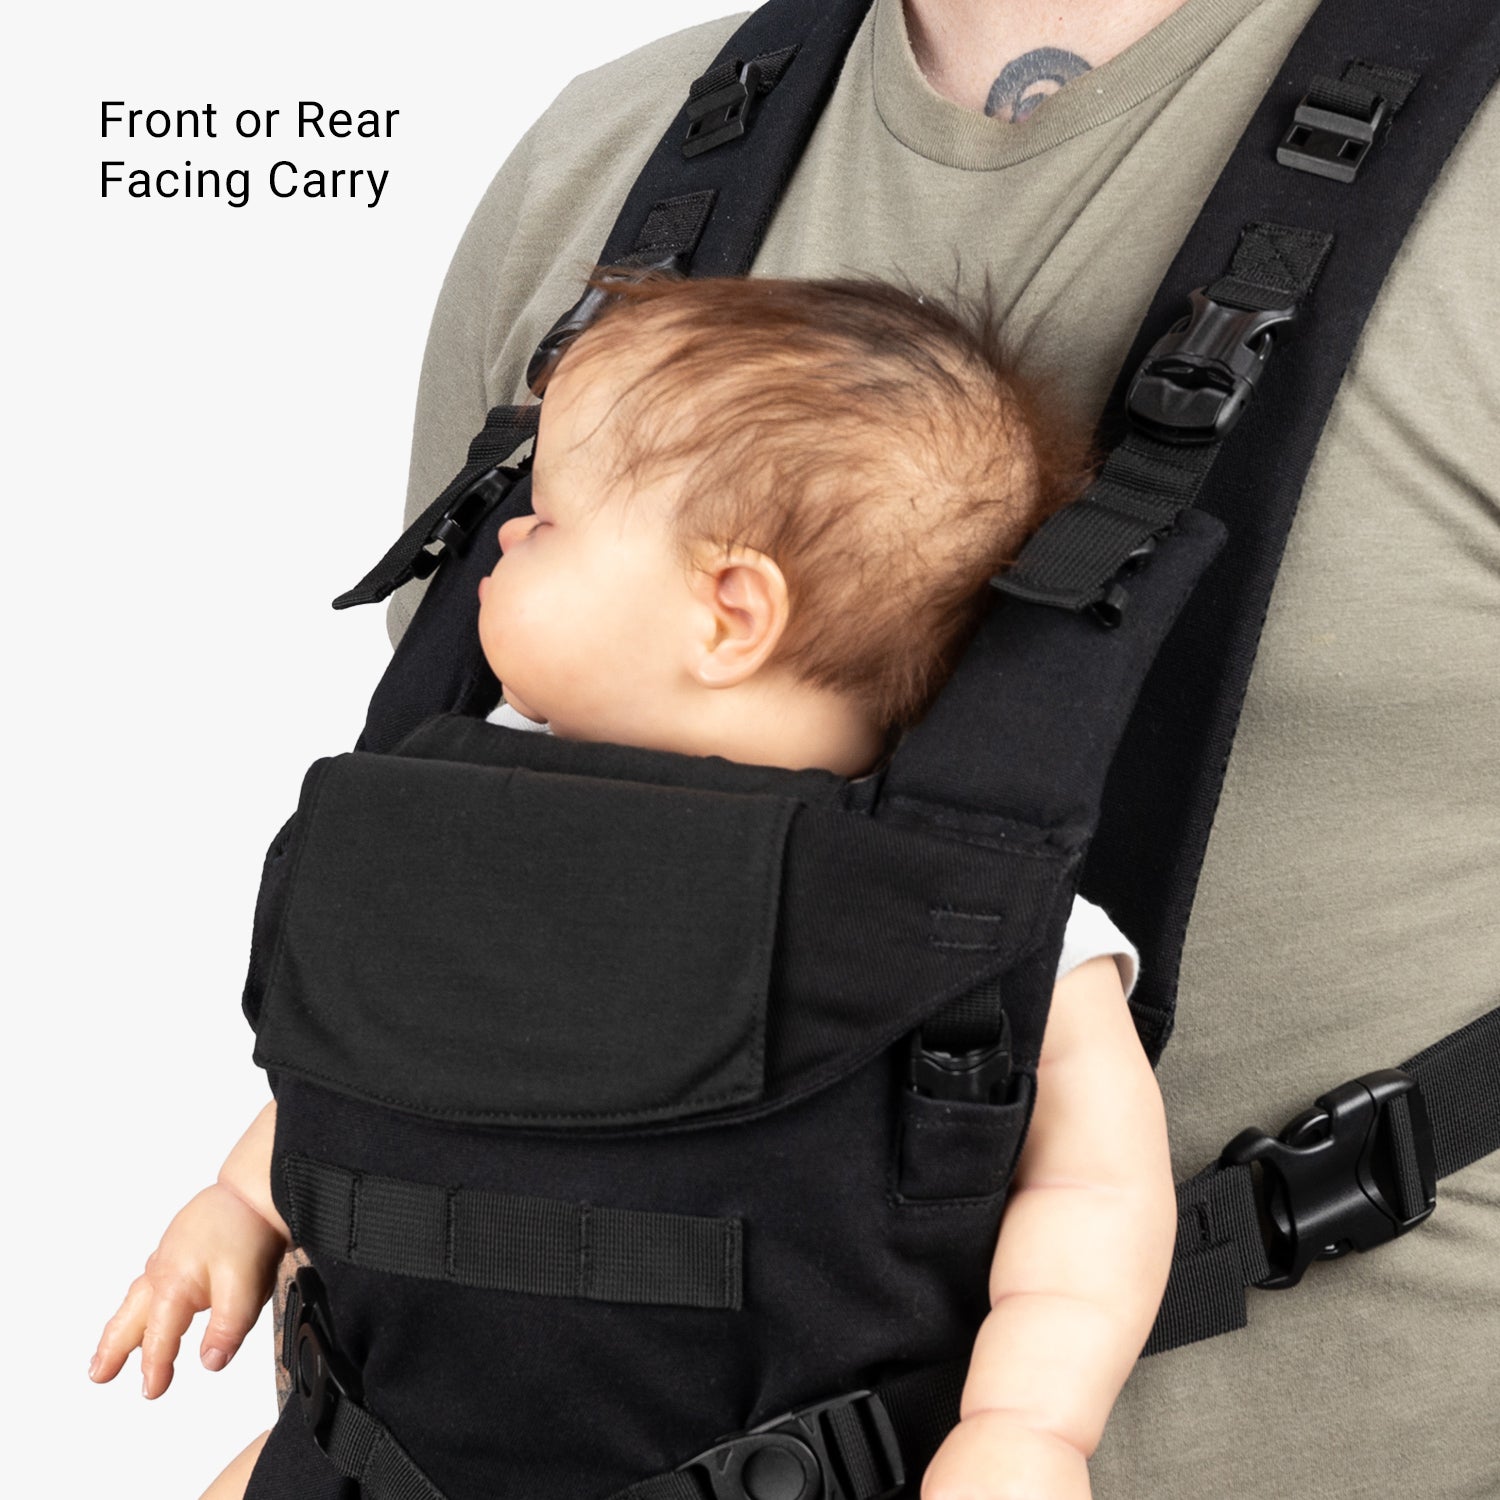 Expedition Diaper Bag + Baby Carrier Bundle